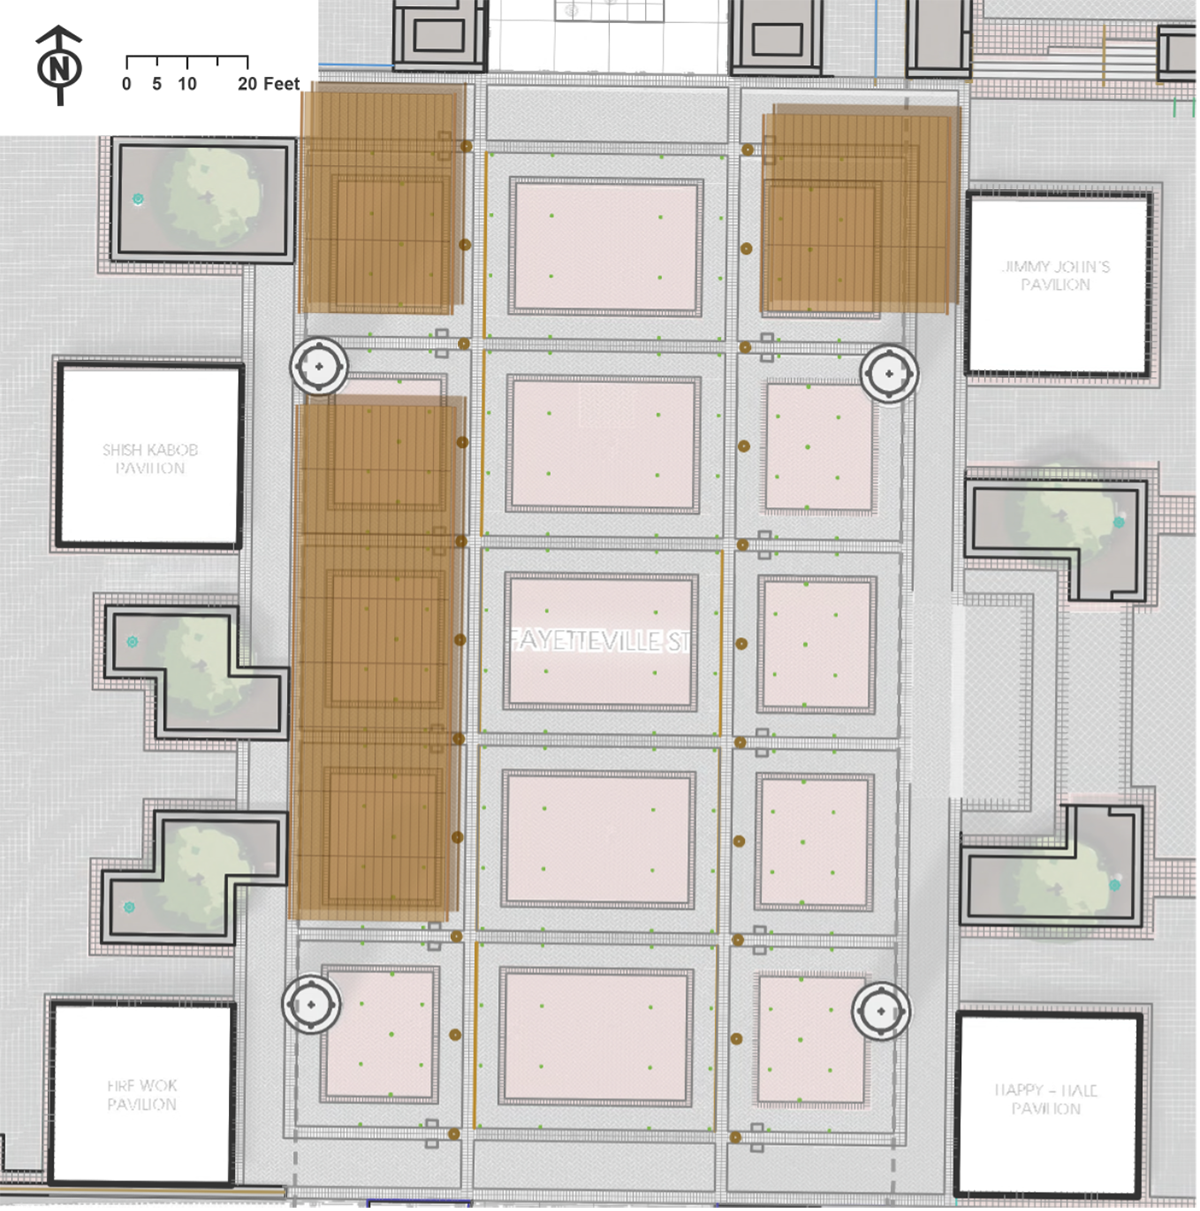 City Plaza - Potential Shading Areas for Permanent Shade Structures (general layout, subject to change)